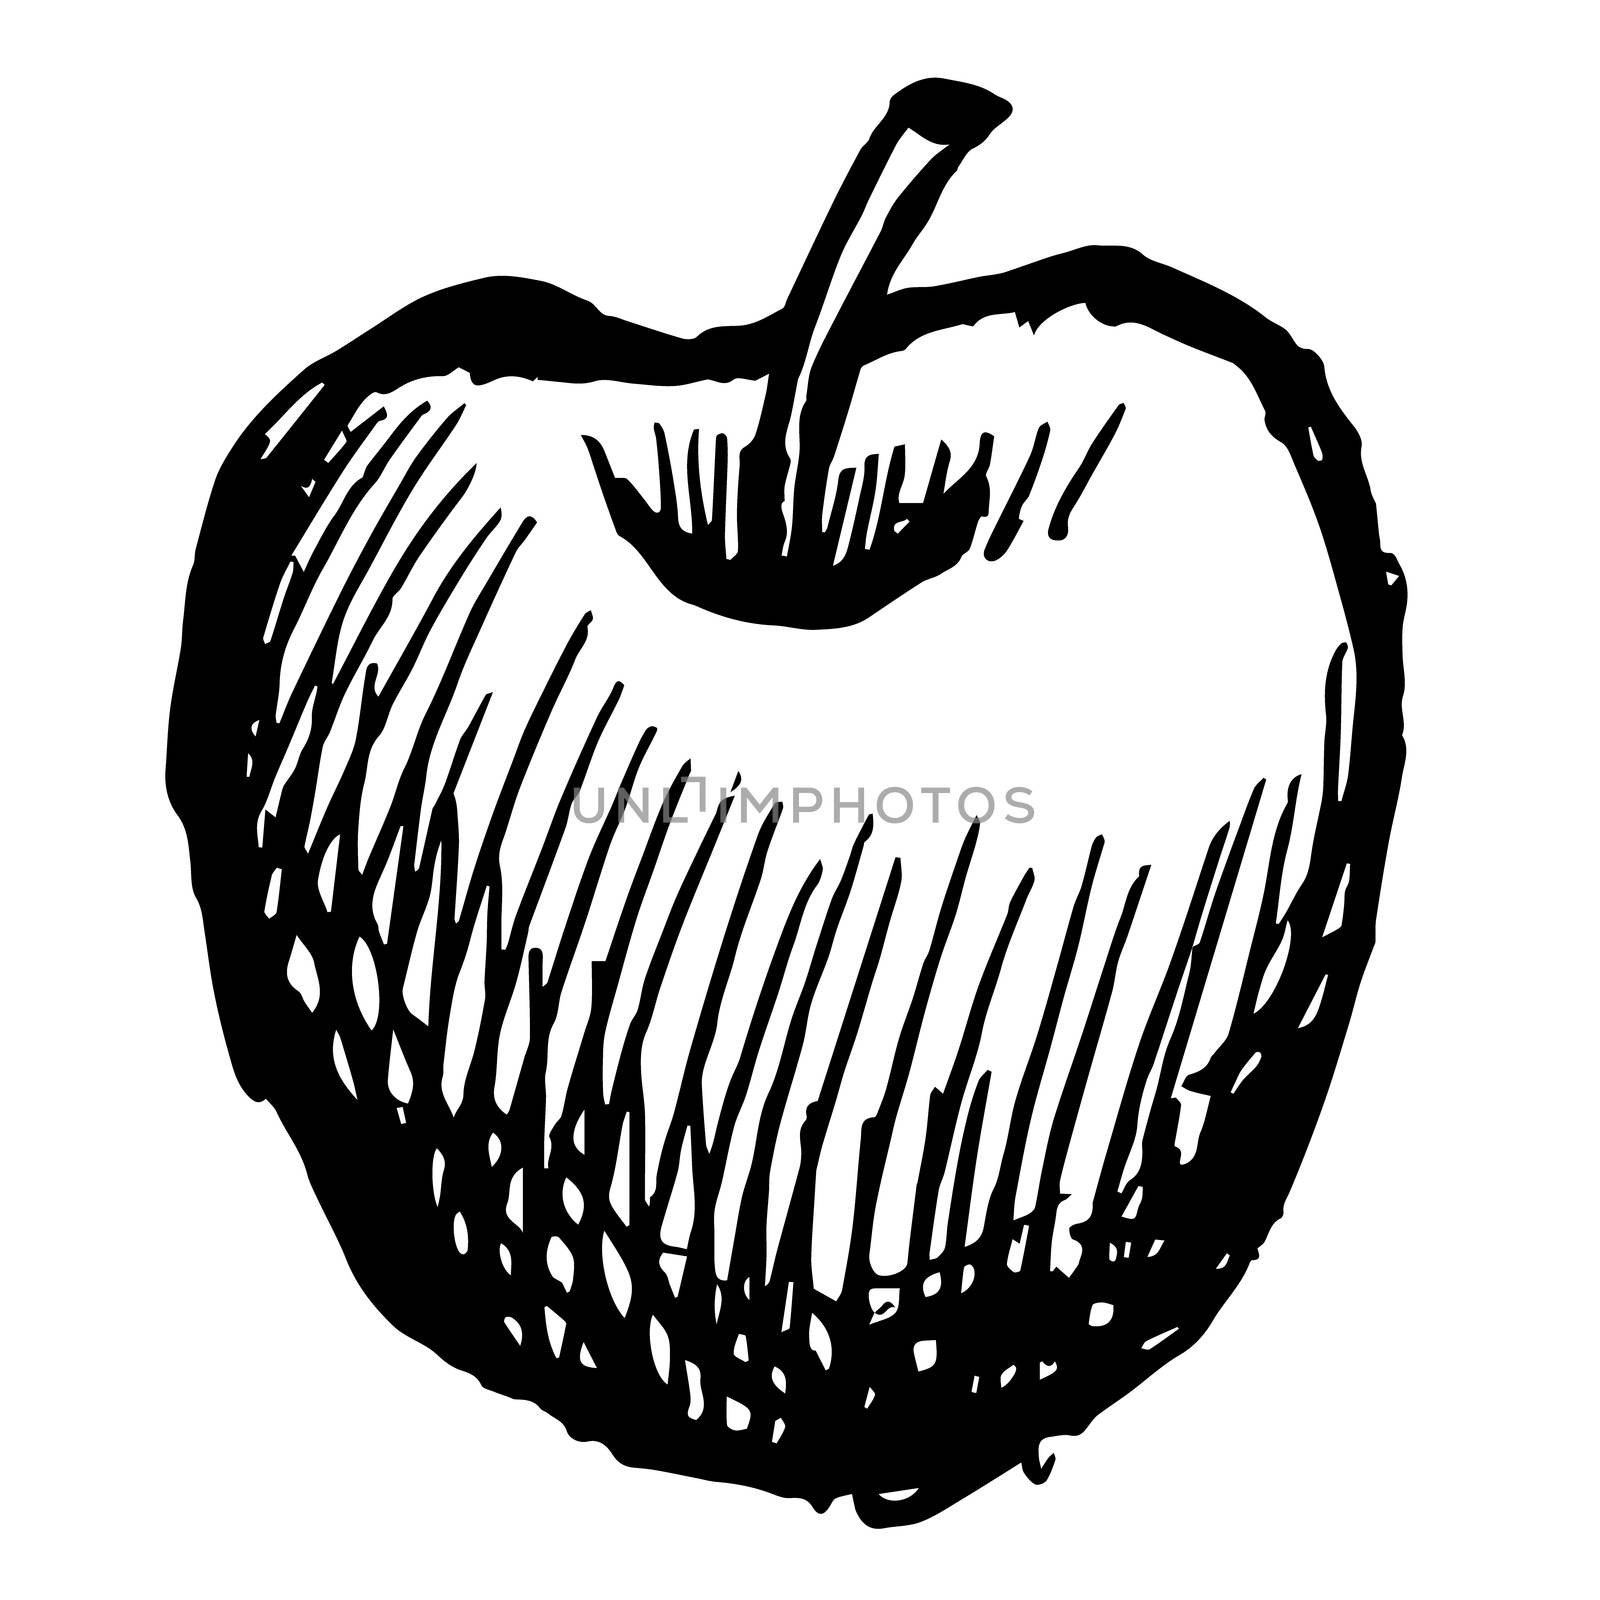 freehand sketch illustration of apple doodle hand drawn